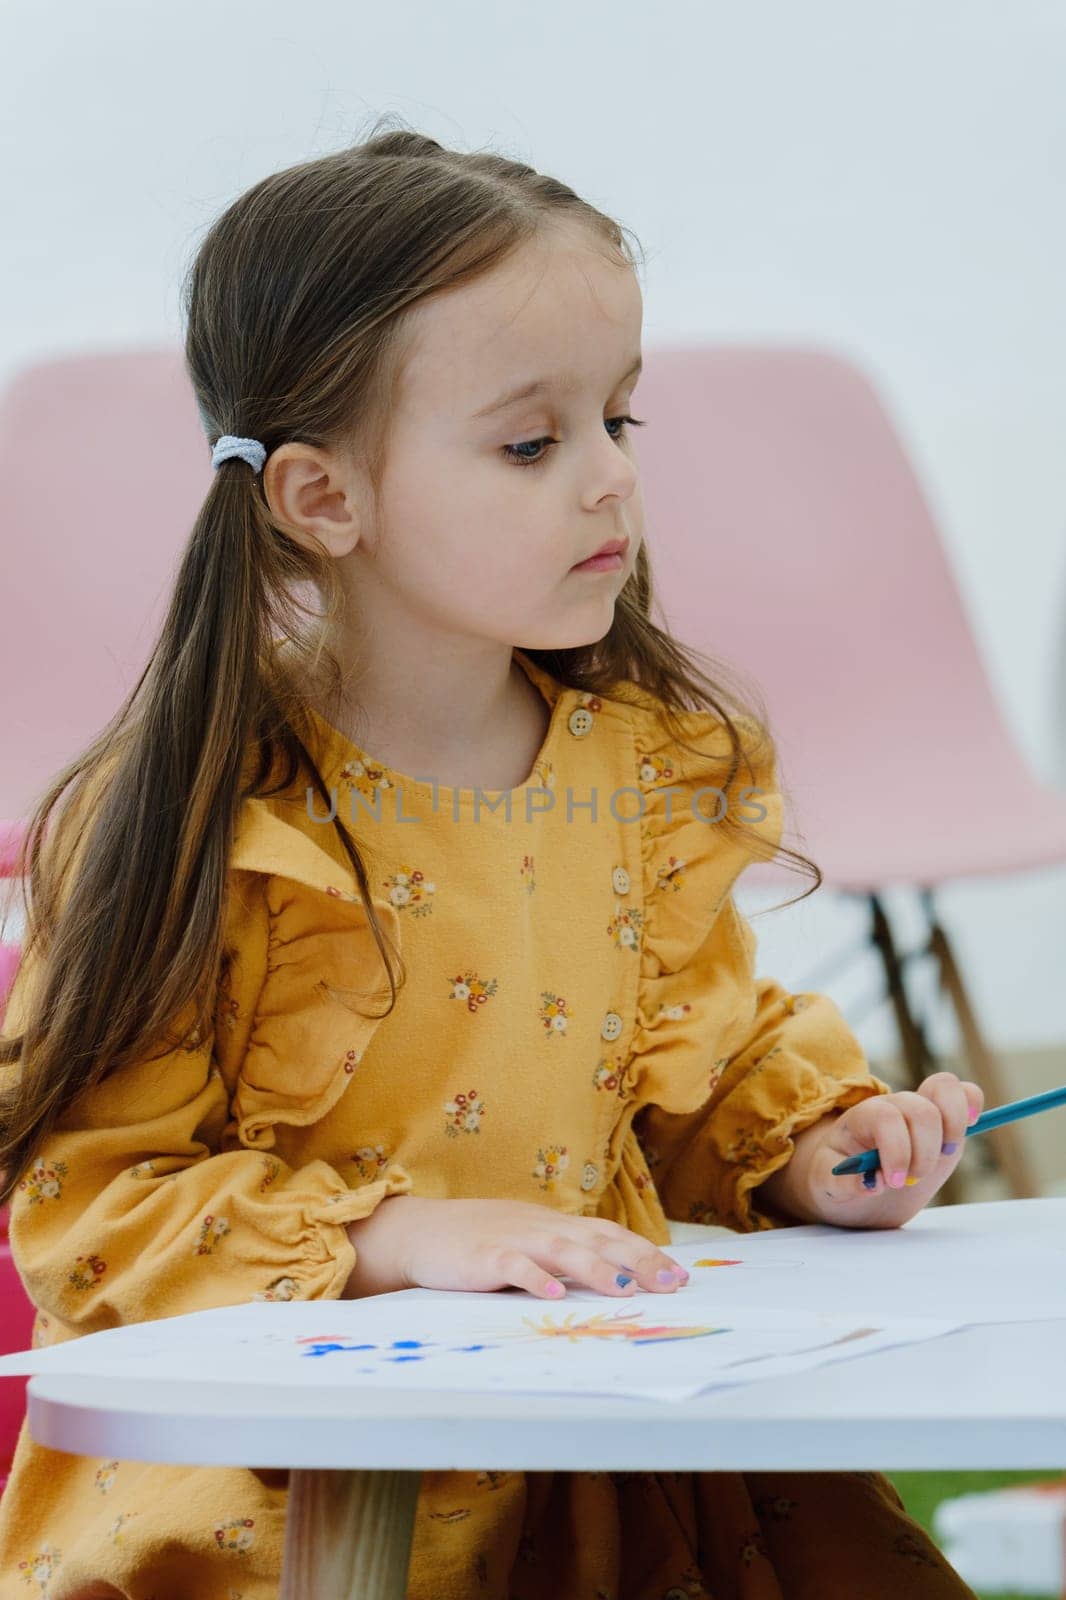 Girl painting with colored pencil. Kindergarten children education concept.